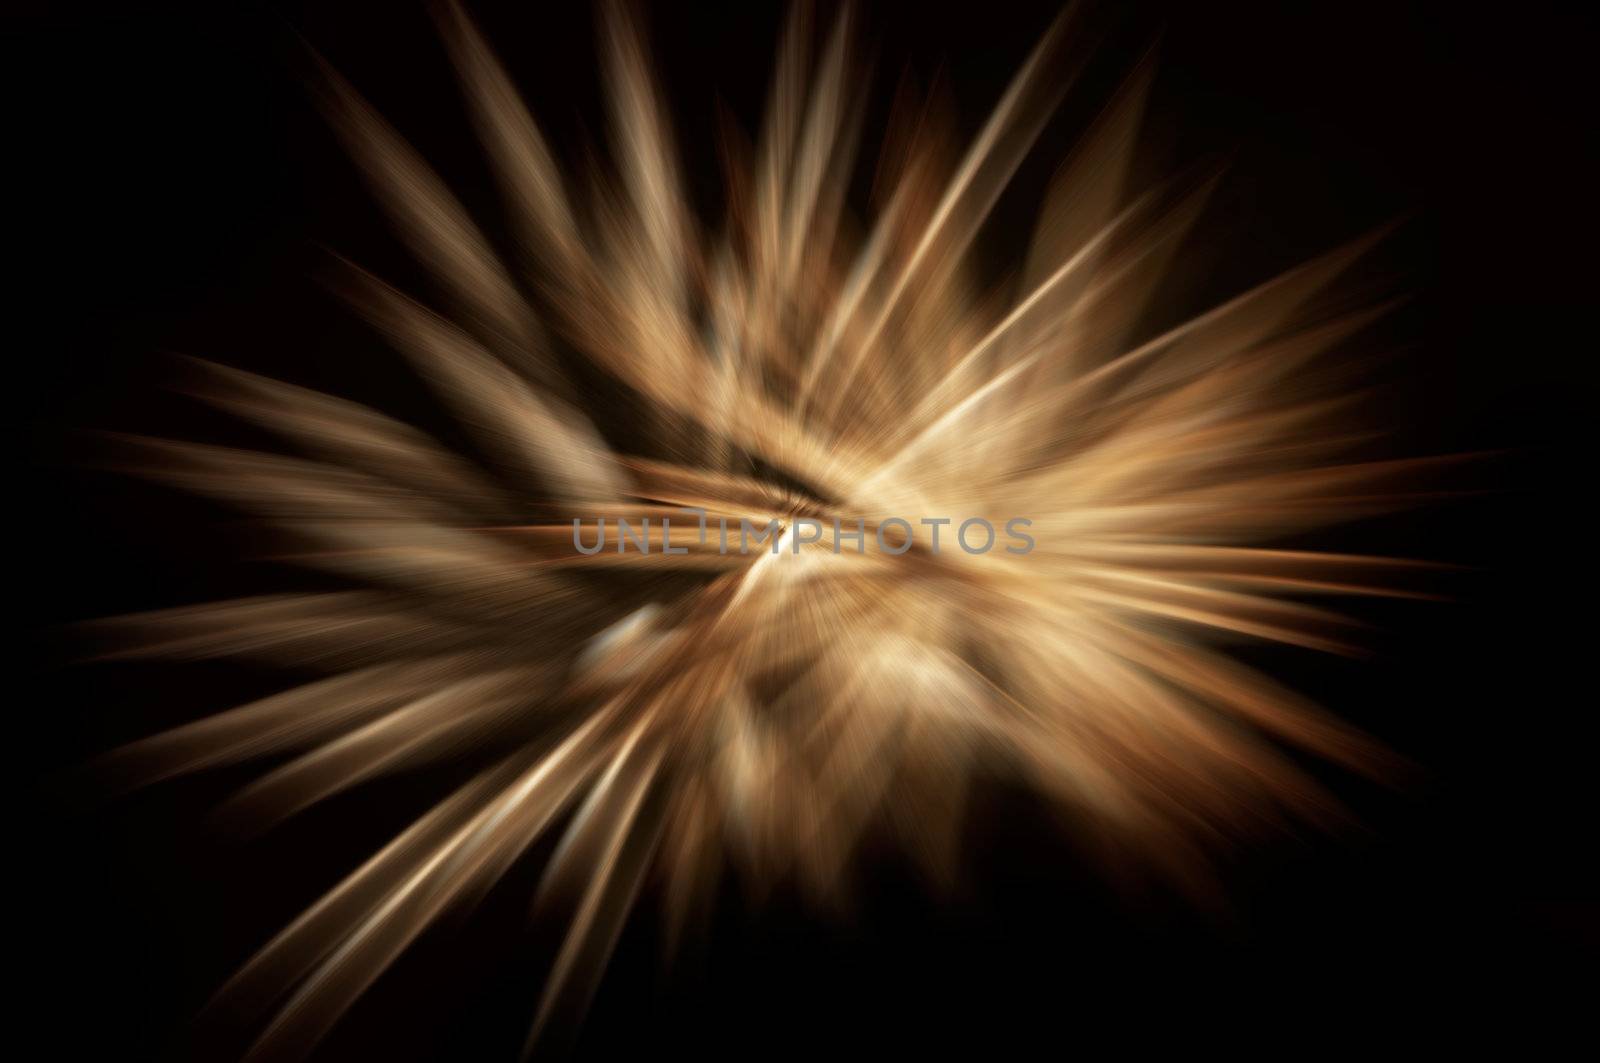 Abstract image of the explosion - fireworks